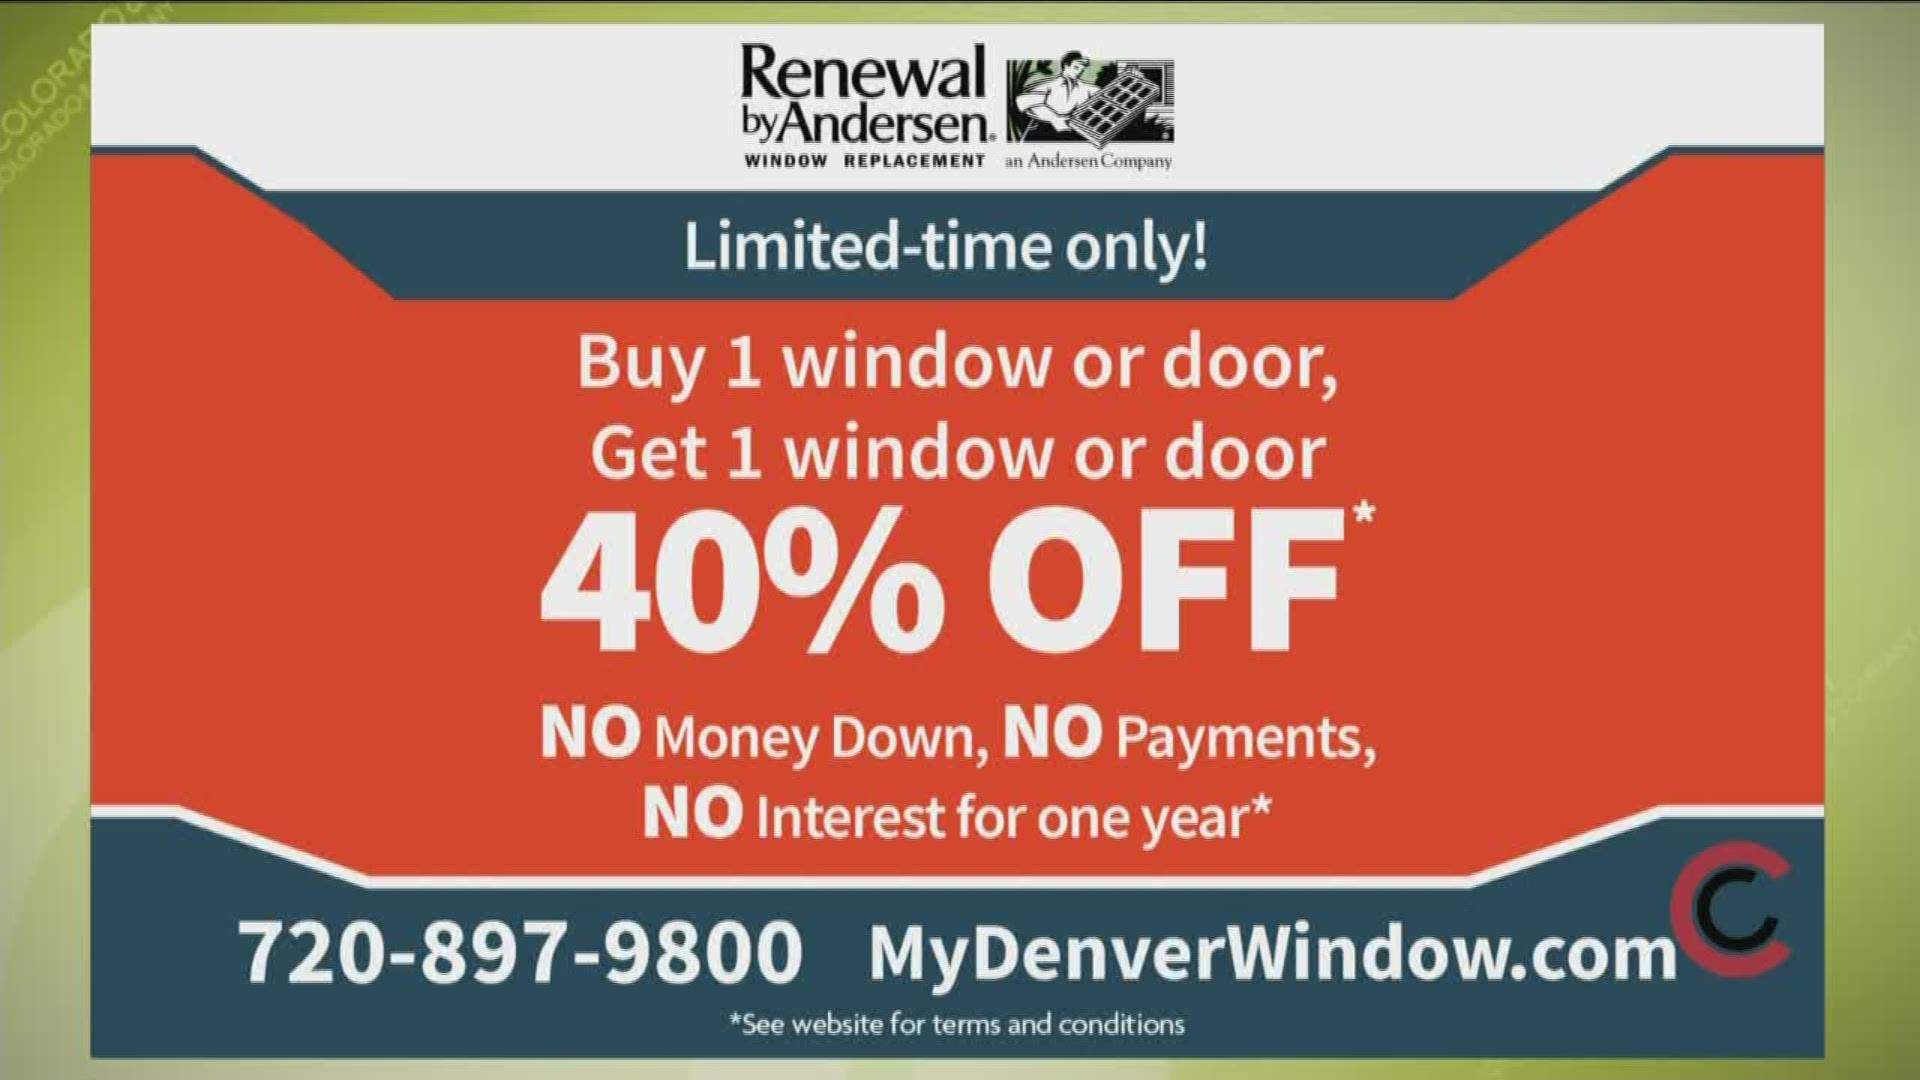 Buy one window or door from Renewal by Andersen, you’ll get 40% off the next! Learn more about their deals at www.MyDenverWindow.com, or call 720.897.9800.